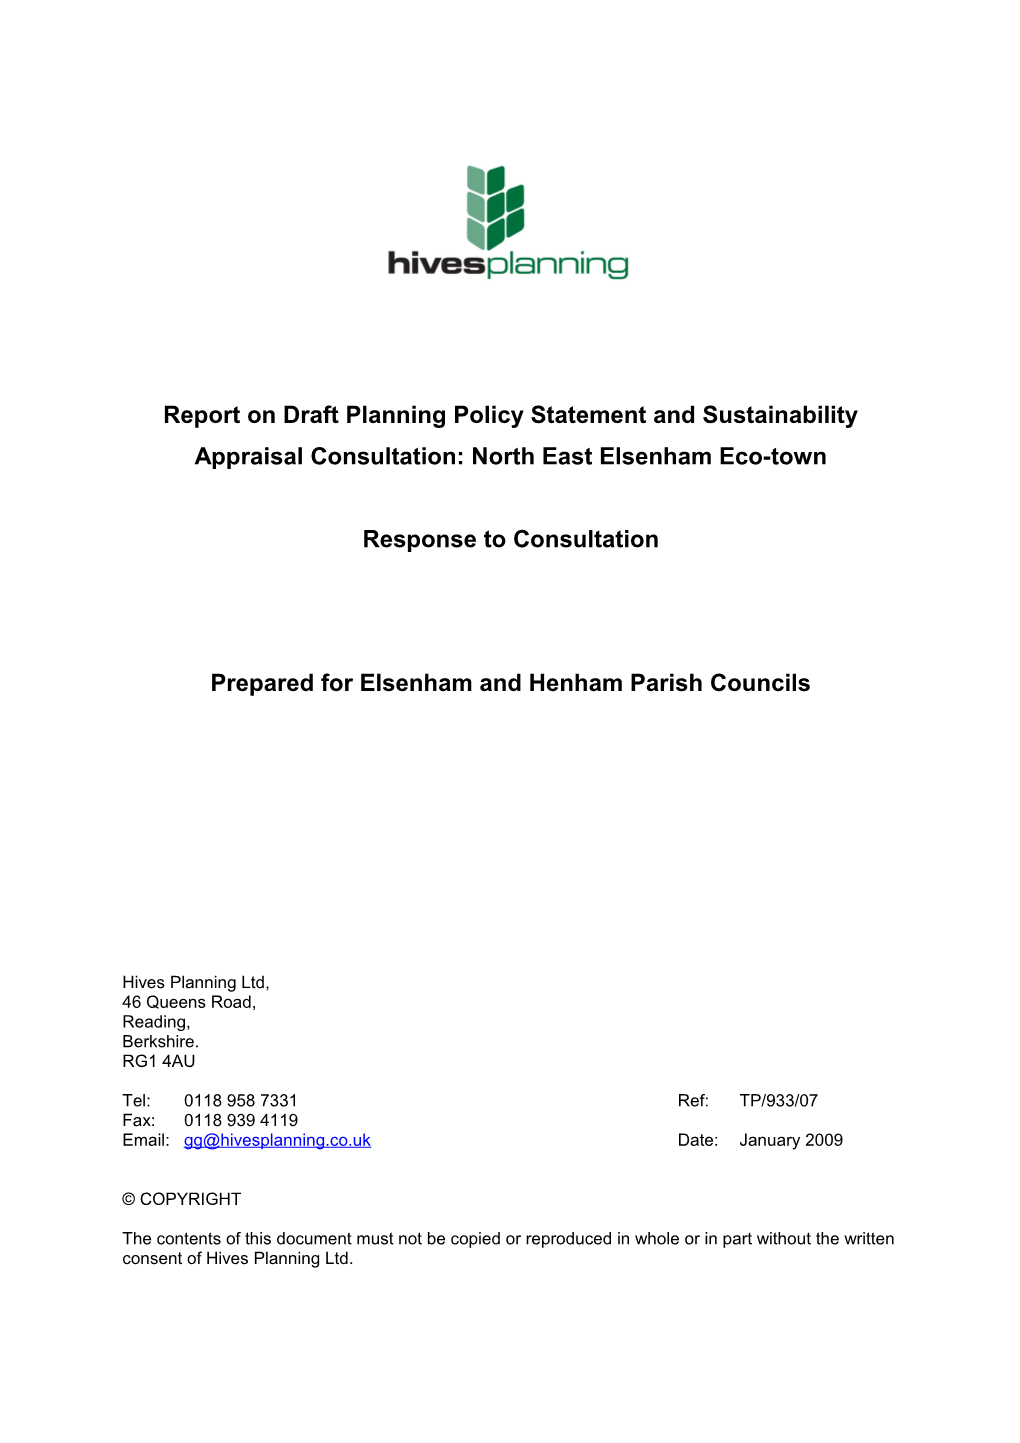 Draft Planning Policy Statement: North East Elsenham Eco-Town